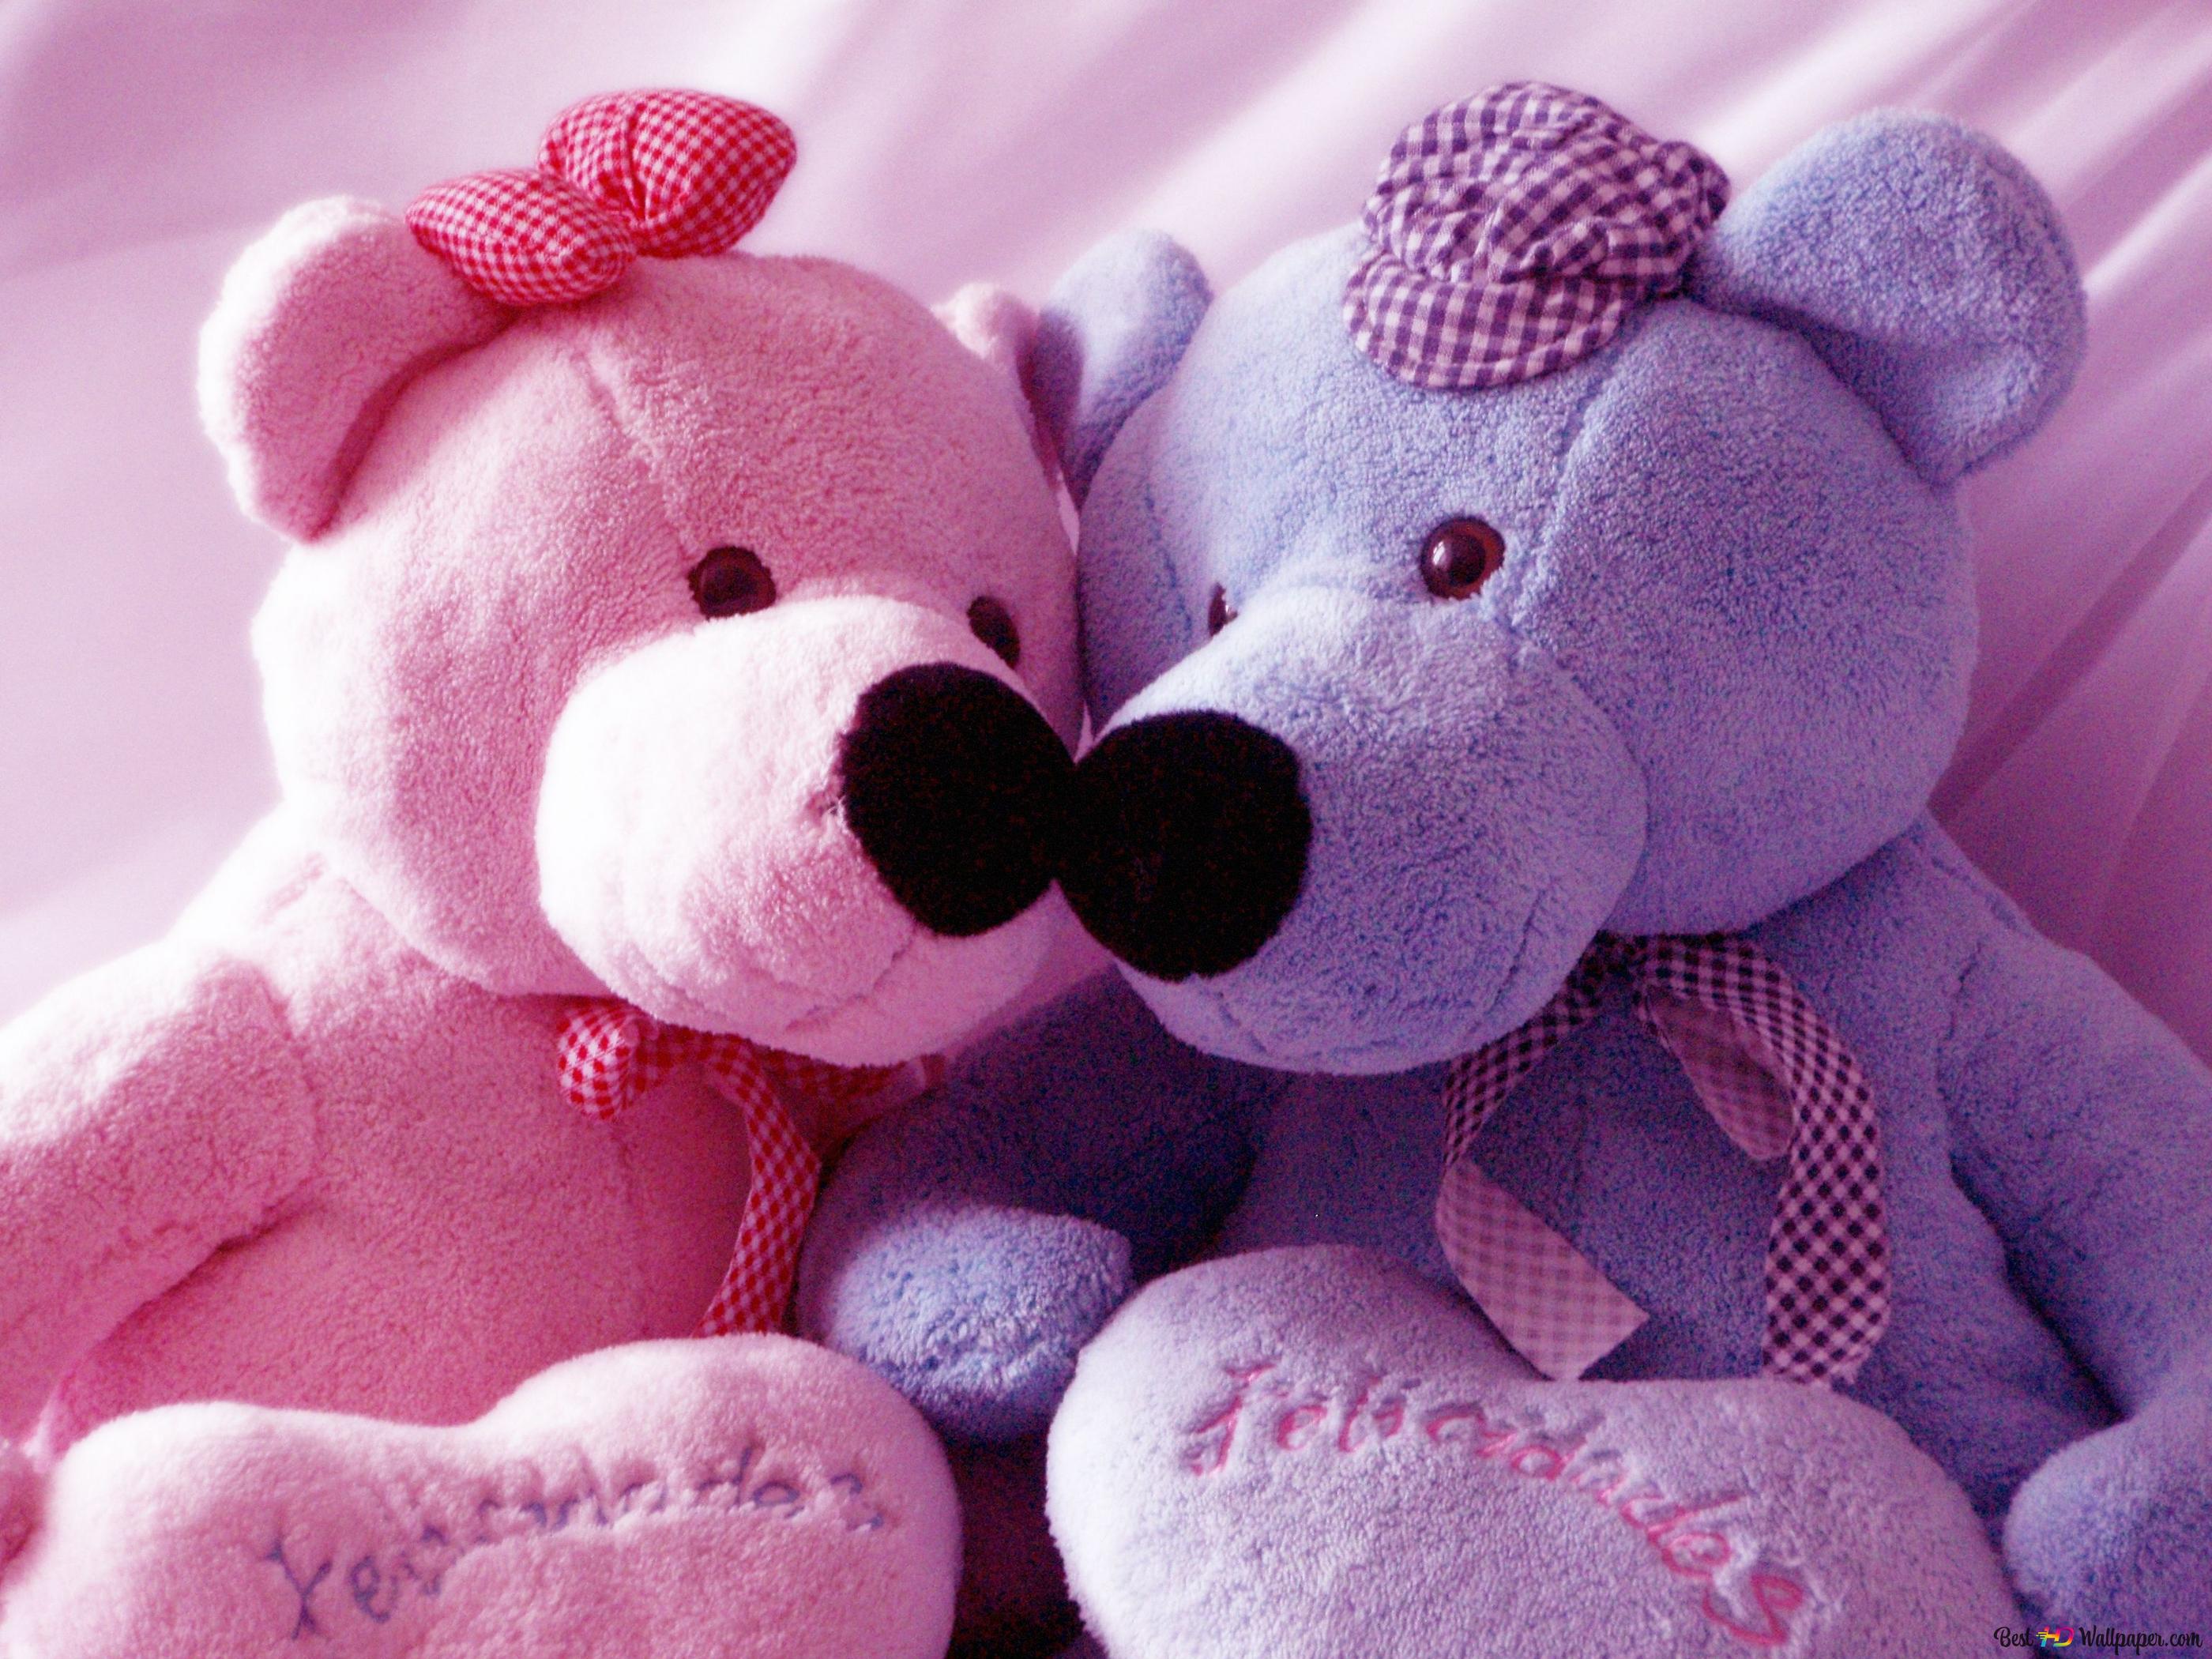 Two cute bears in purple and pink 2K wallpaper download